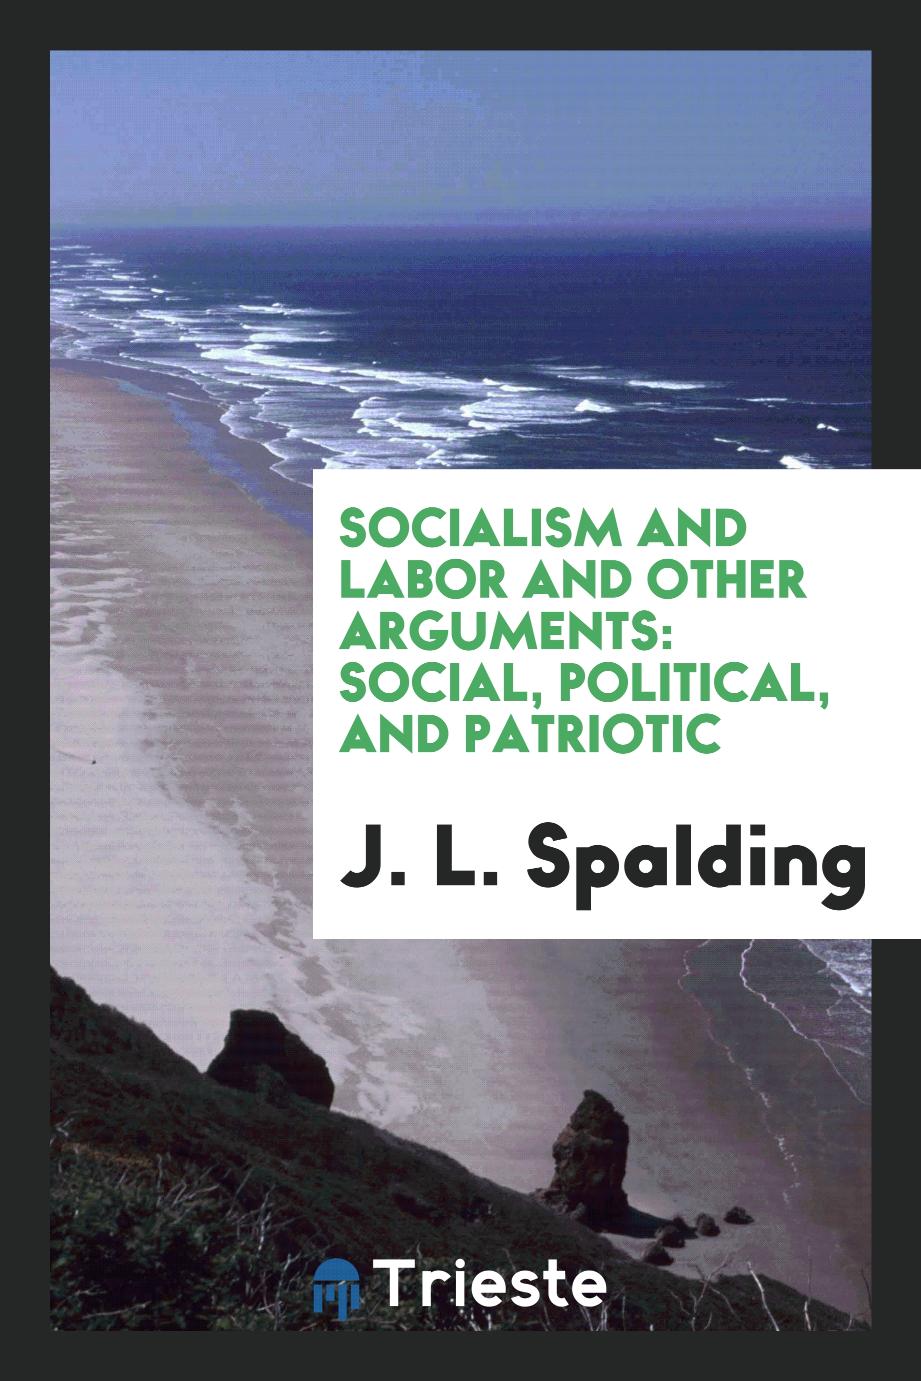 Socialism and labor and other arguments: social, political, and patriotic